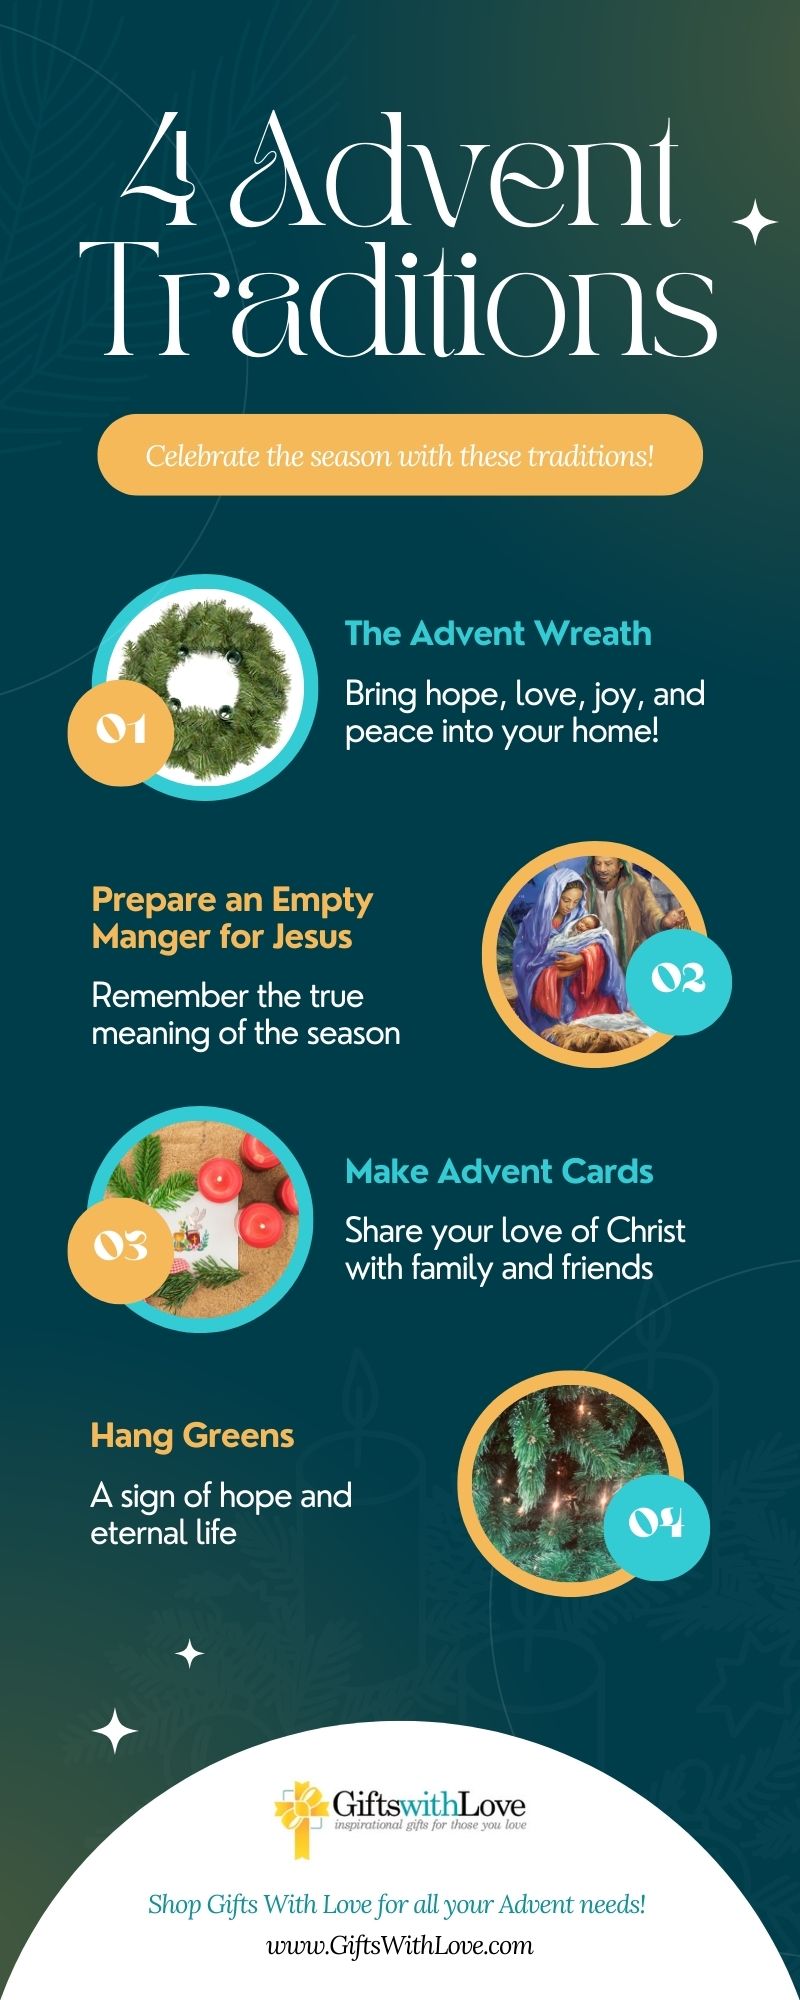 4 Advent Traditions Infographic